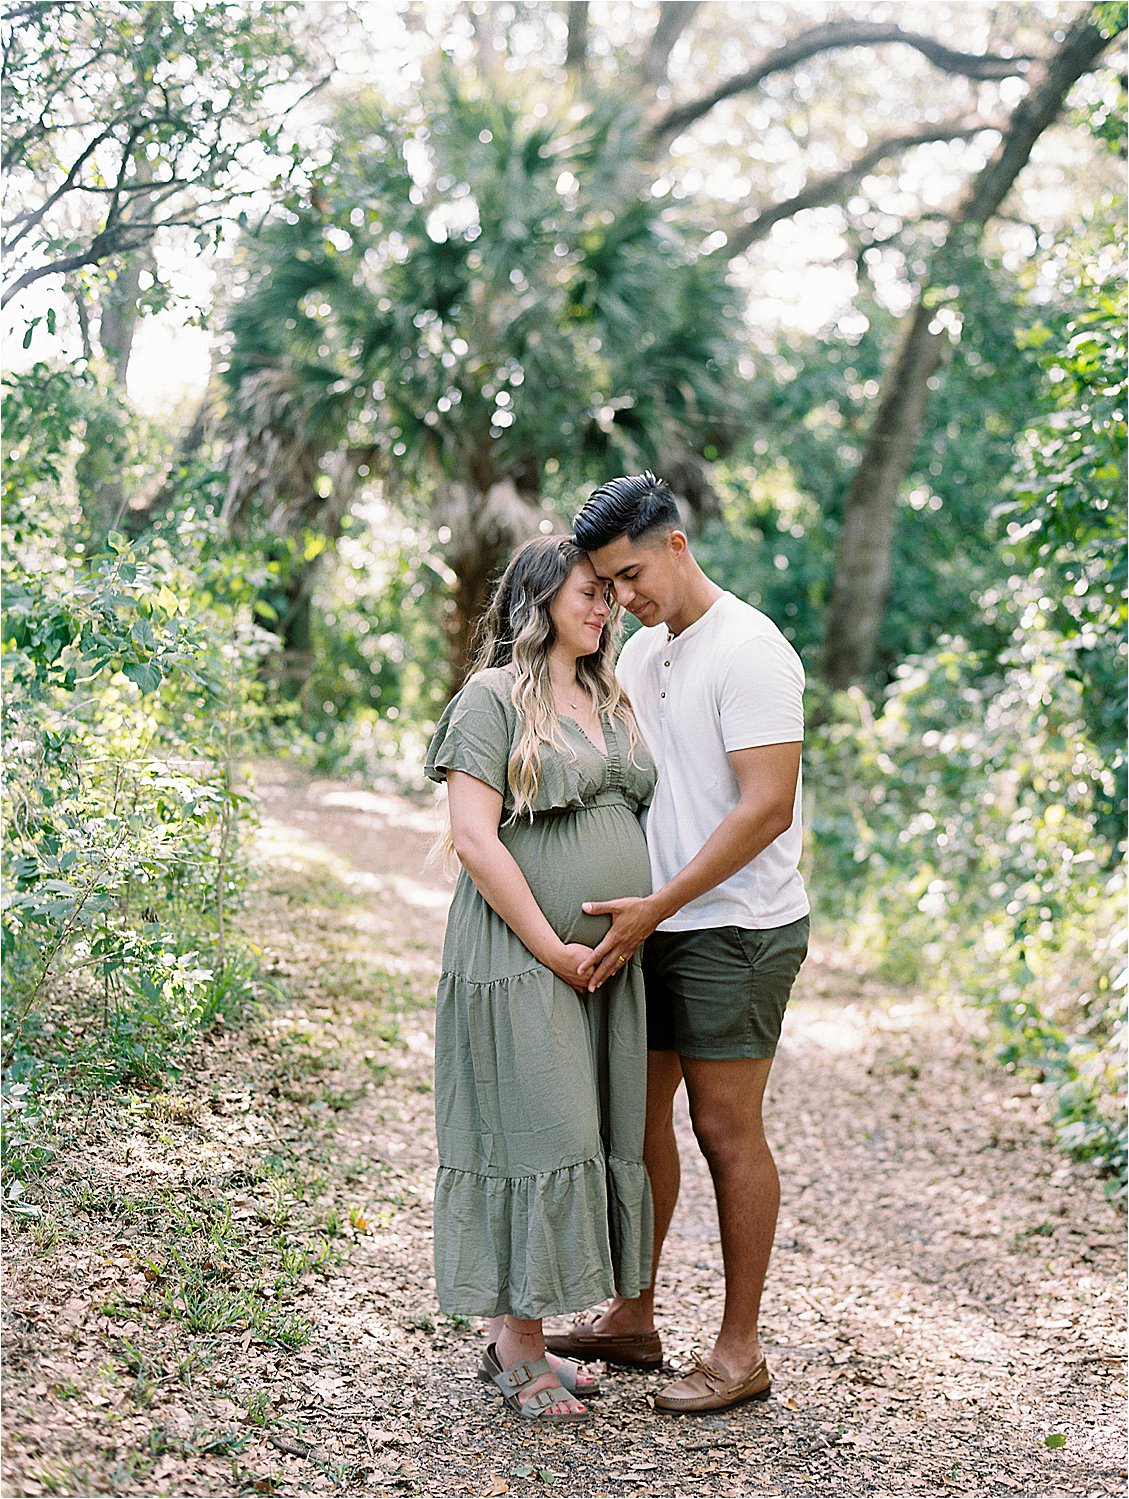 Maternity Session at Tree Tops Park on film with film family photographer Renee Hollingshead